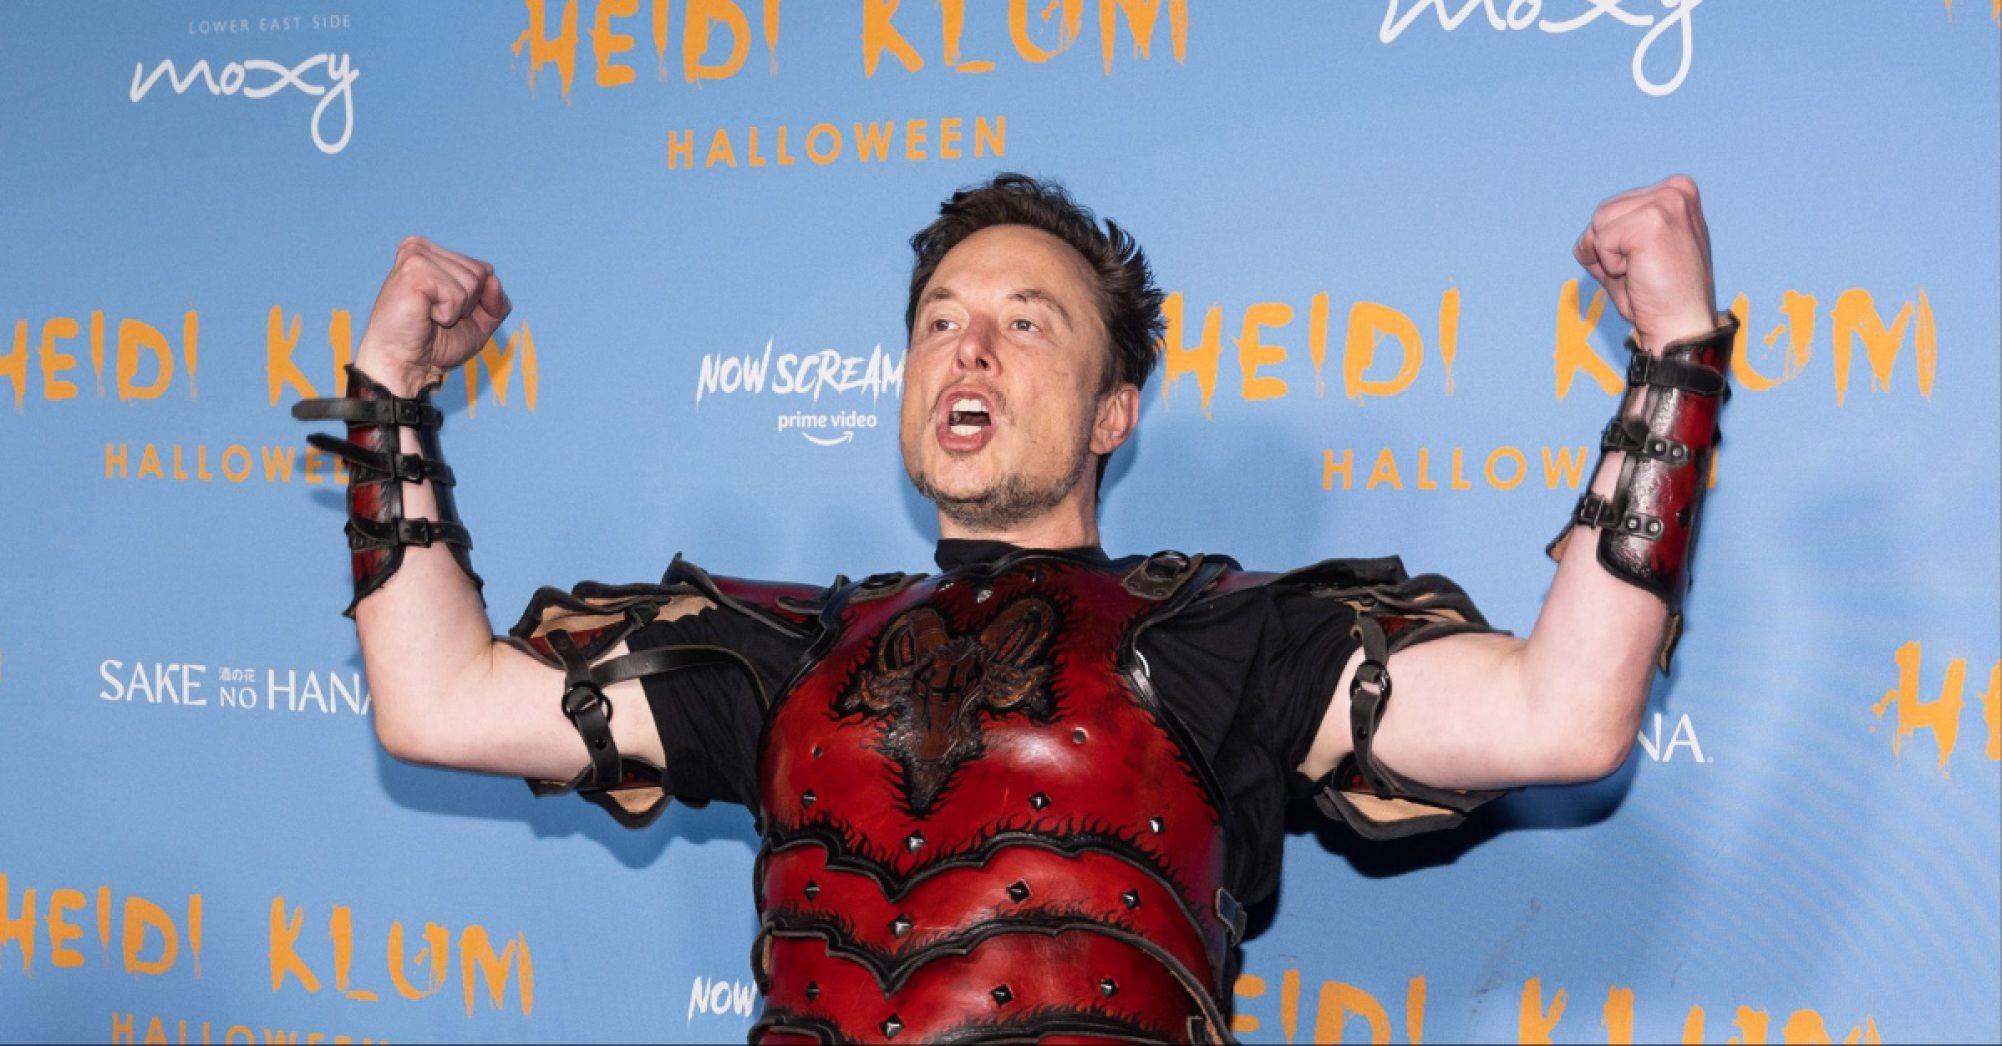 Elon Musk raises his arms and yells, wearing a Halloween costume consisting of red armor.